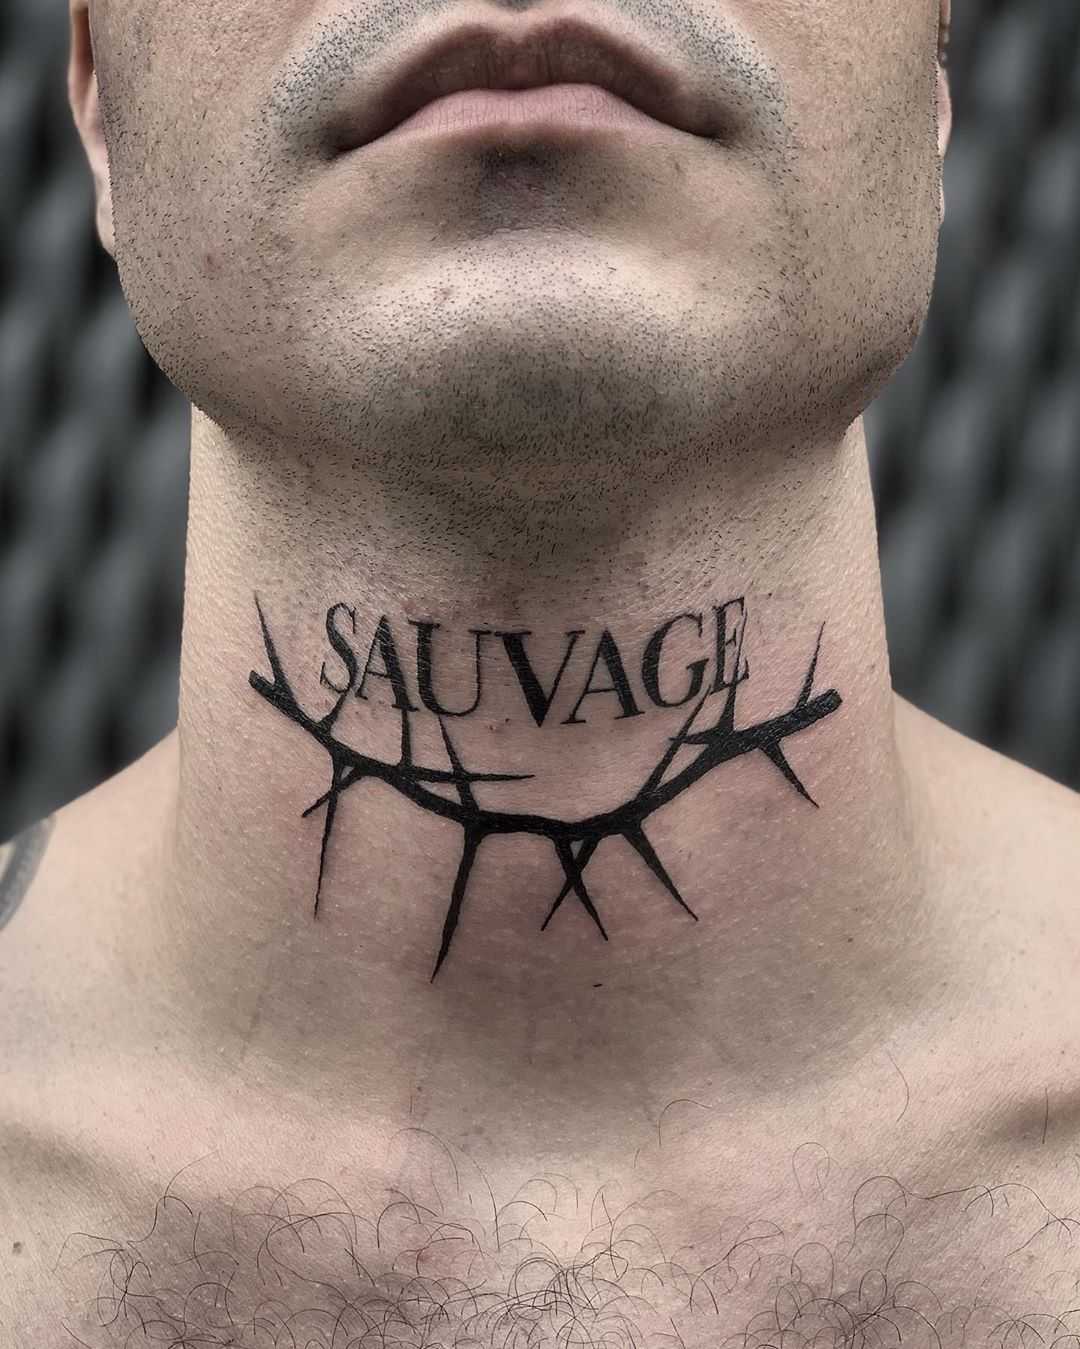 Sauvage tattoo by Loz McLean